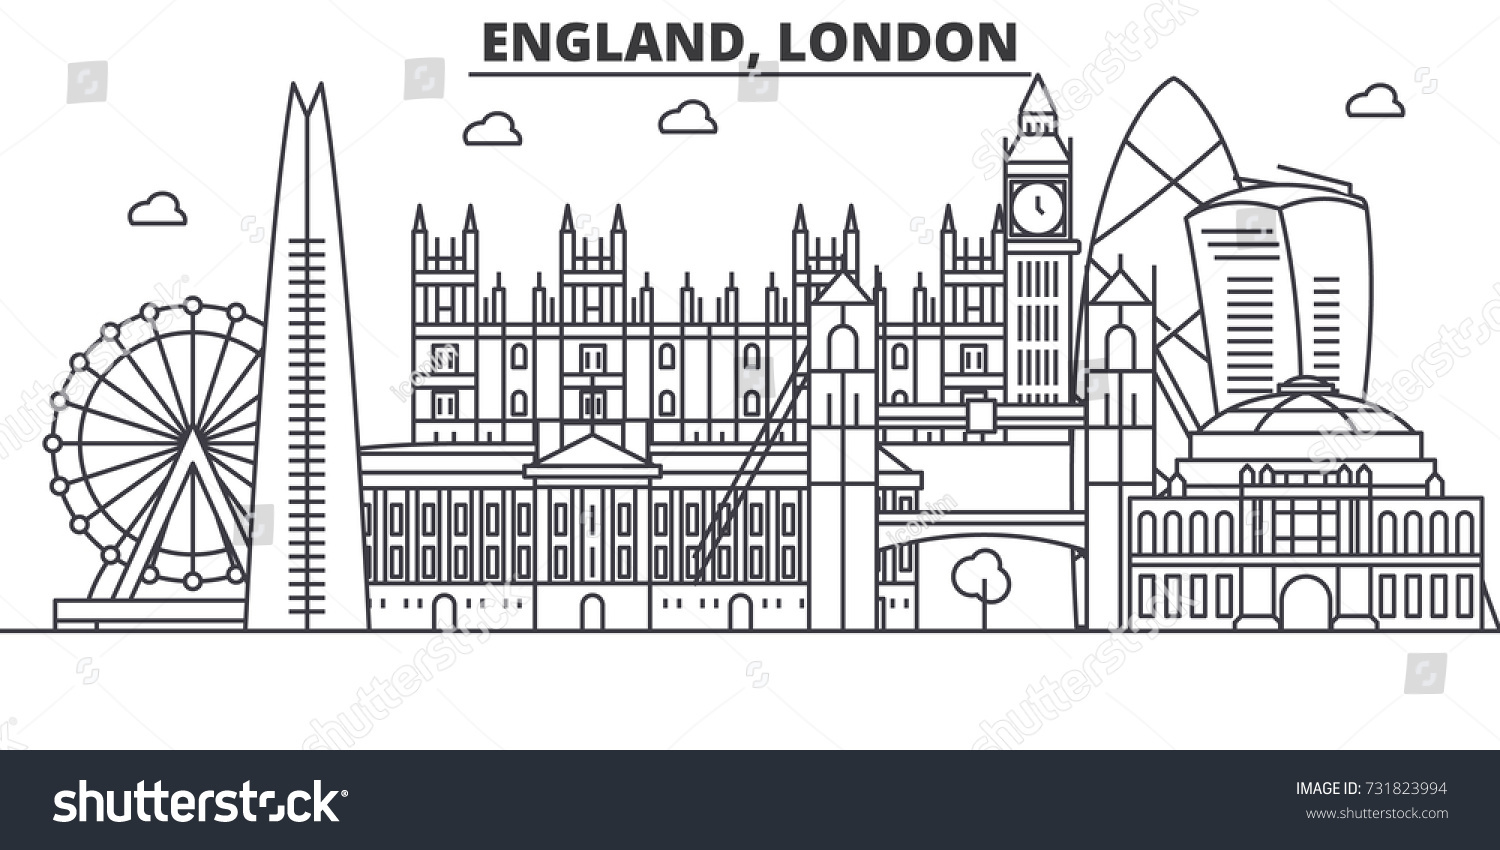 2,455 Uk tourist attractions Stock Illustrations, Images & Vectors ...